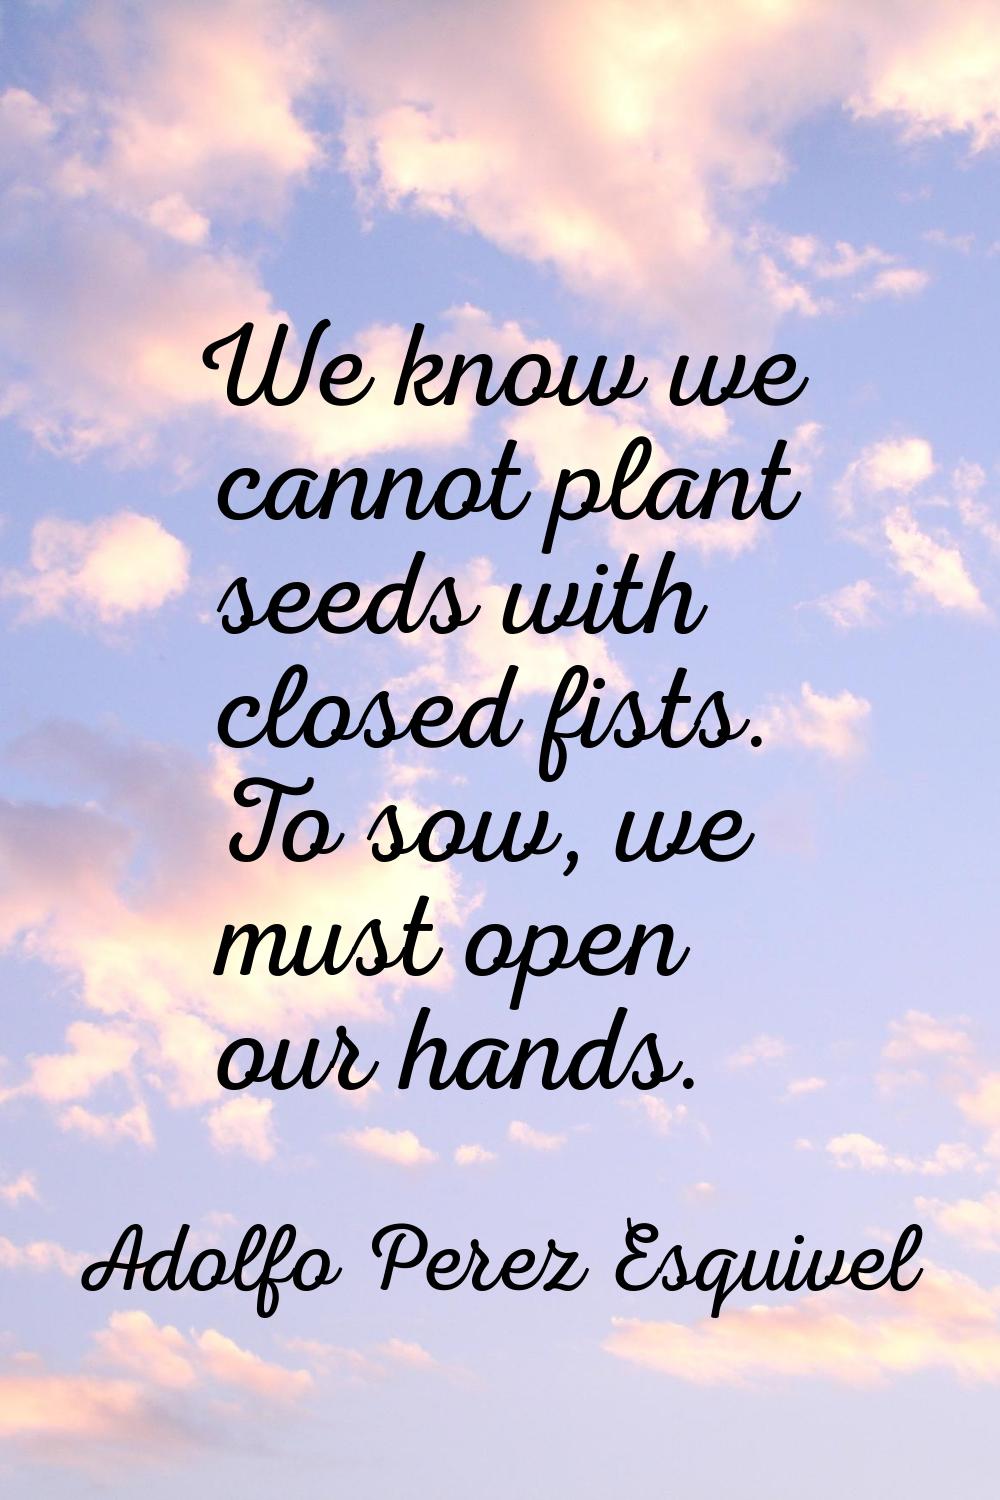 We know we cannot plant seeds with closed fists. To sow, we must open our hands.